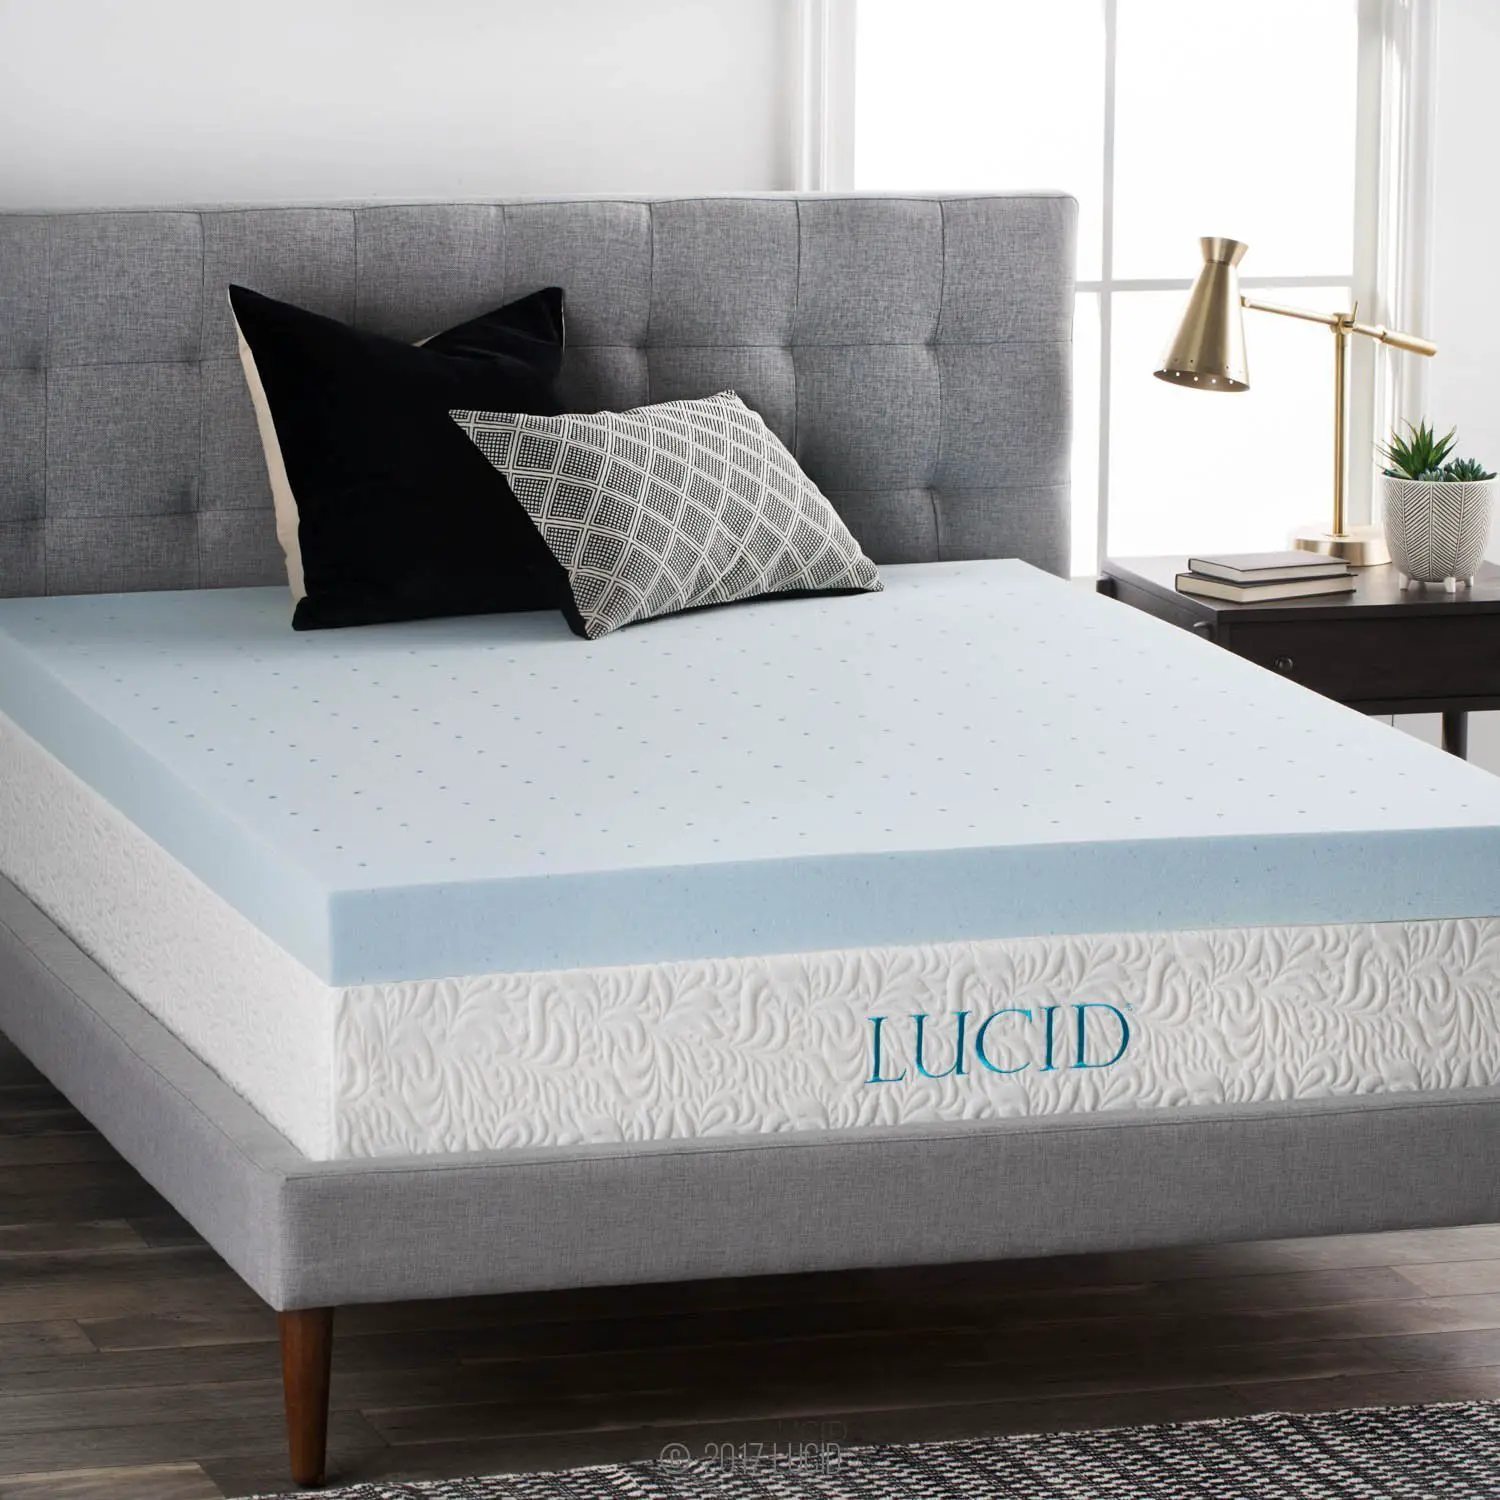 Top 10 Best Mattress Toppers for Back Pain 2020 Reviews